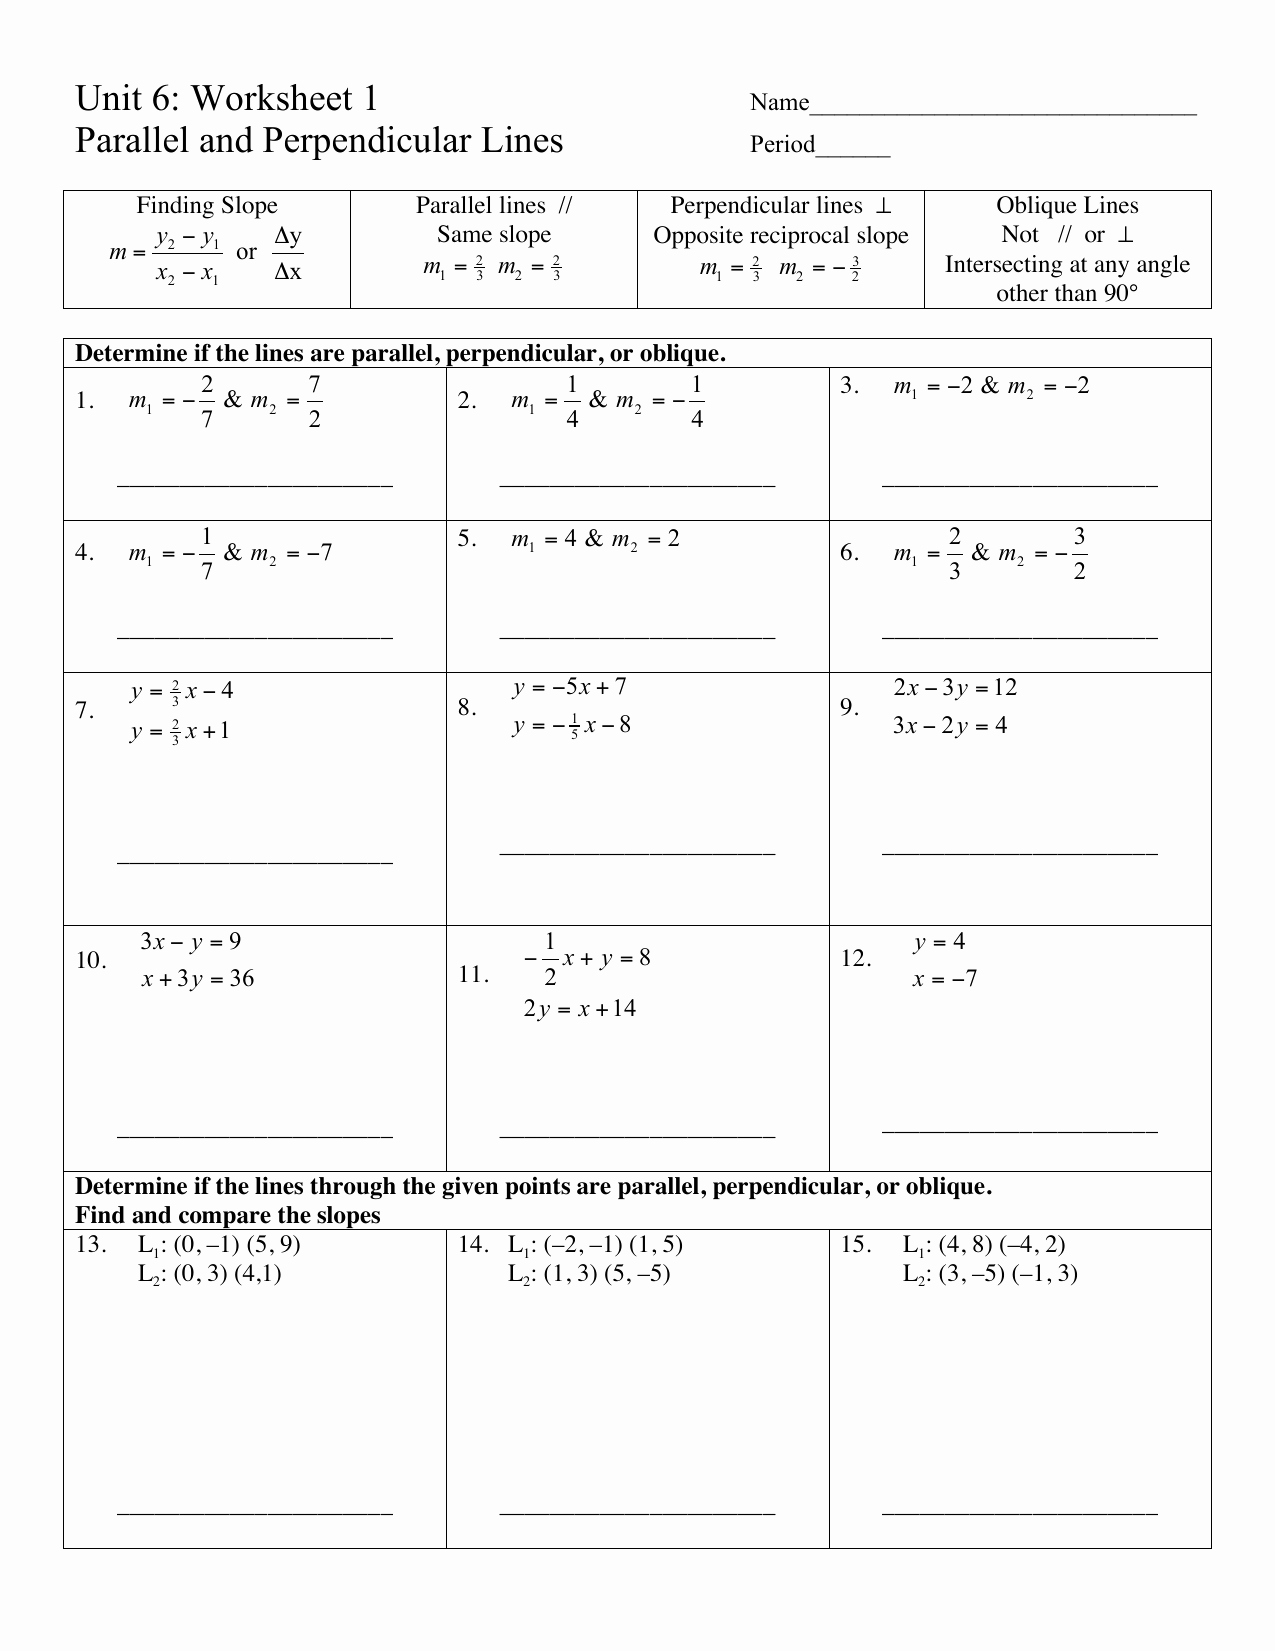 Writing Equations Of Lines Worksheet New Writing Equations for Parallel and Perpendicular Lines